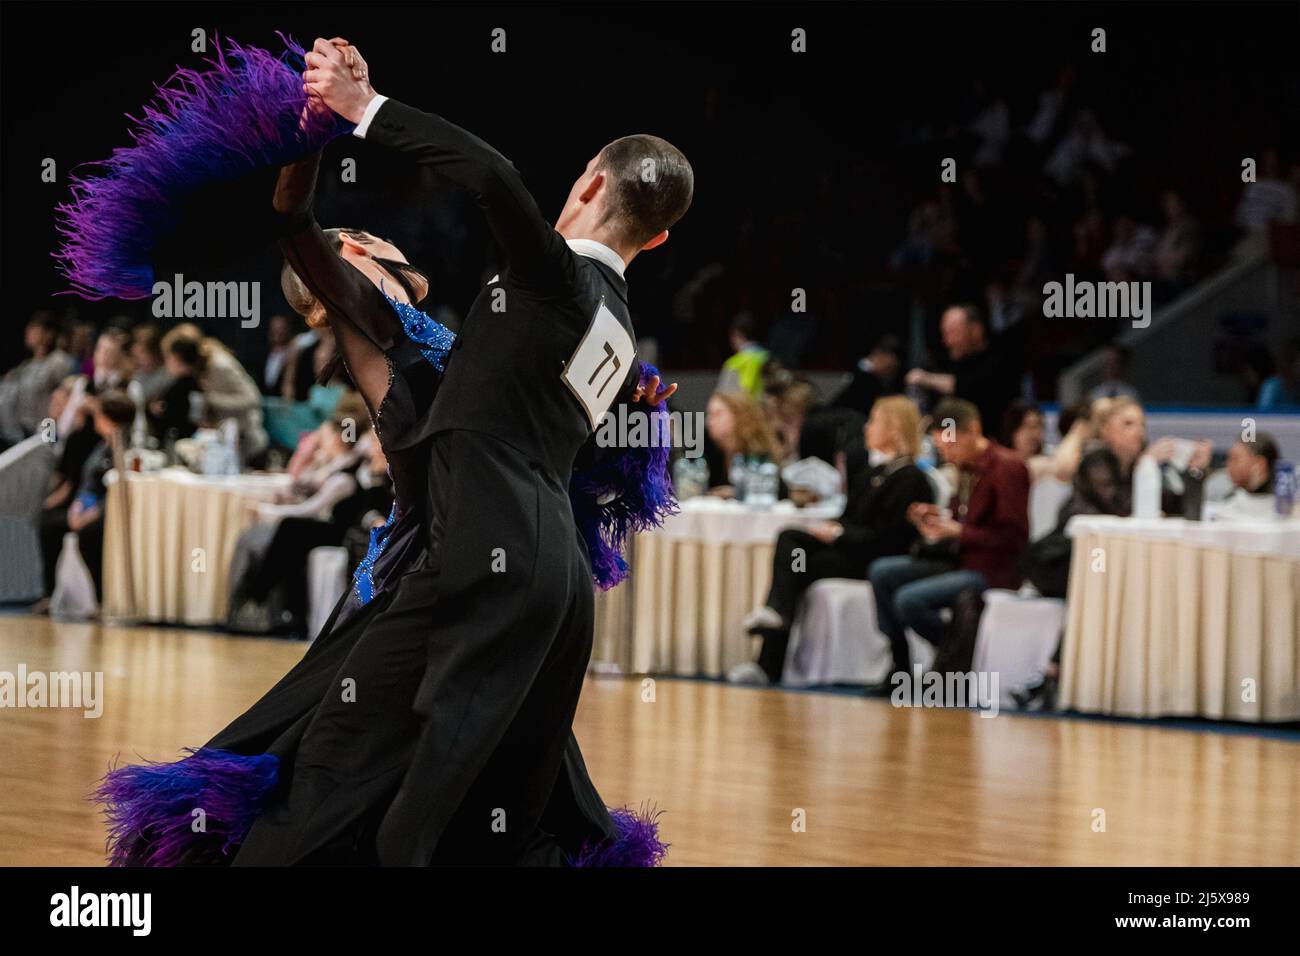 couple dancer dancing waltz in dance competition Stock Photo